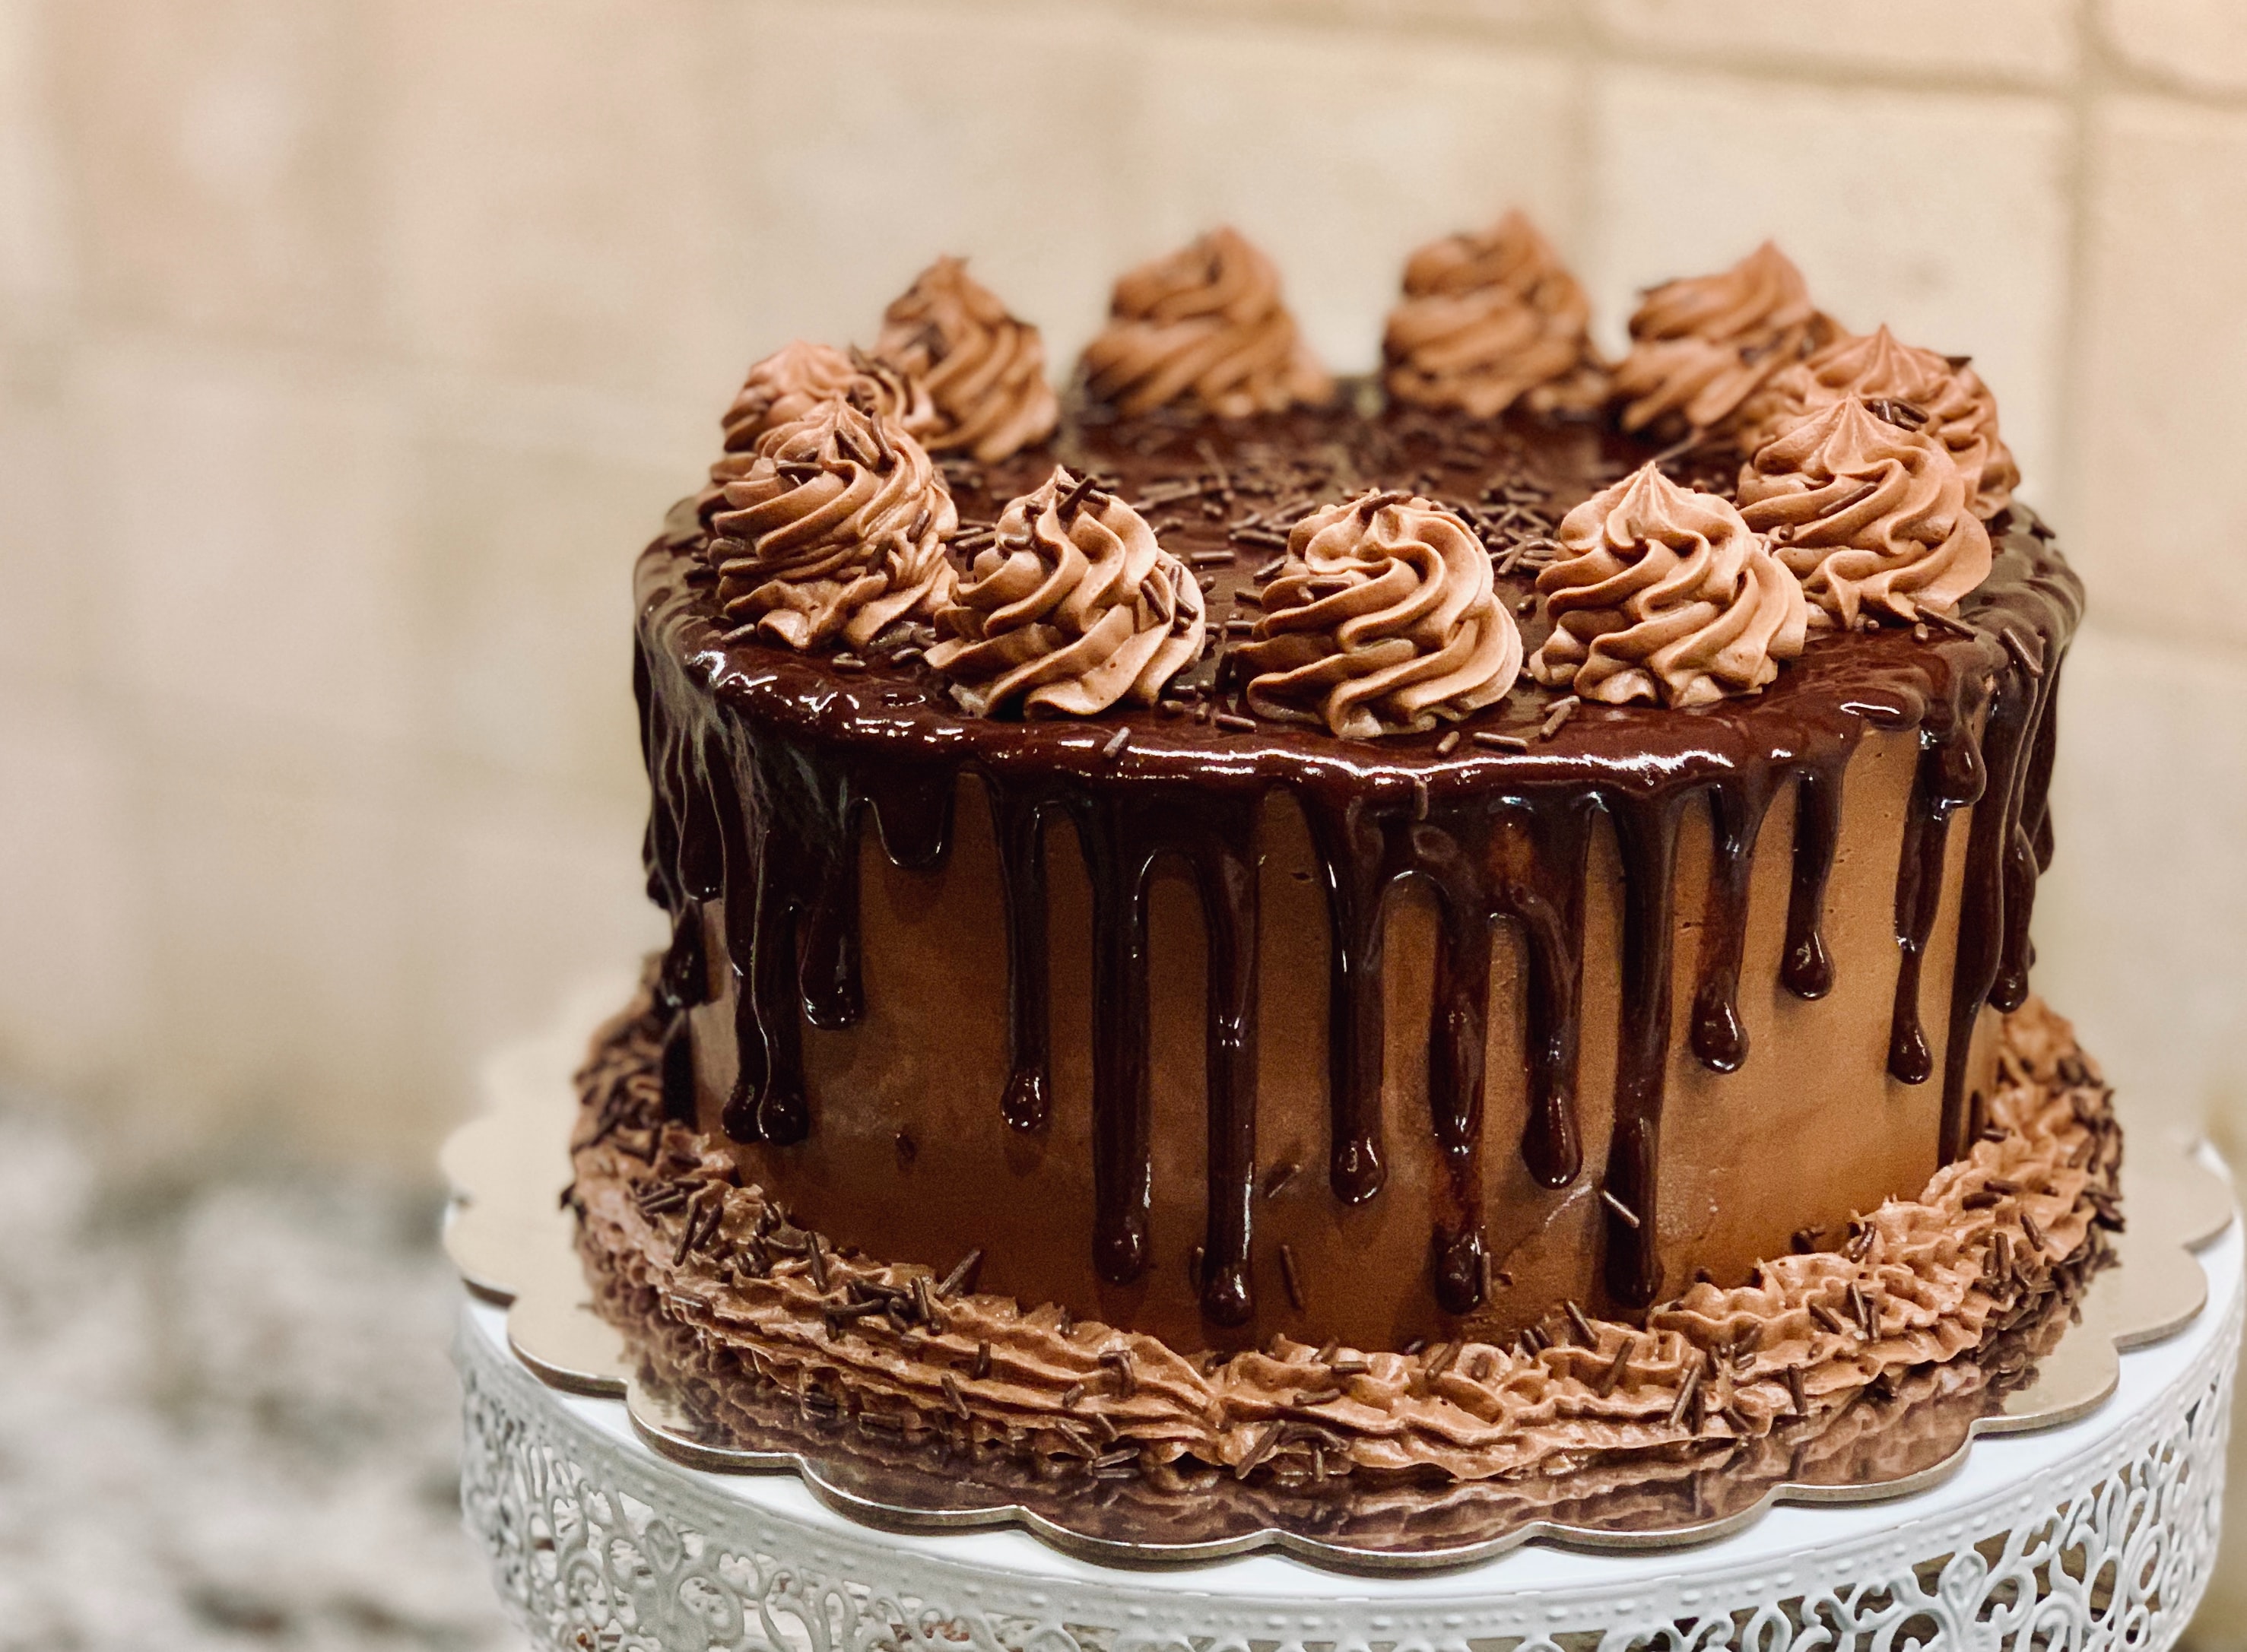 Gilbert Bakers in Lingampally,Hyderabad - Best Bakeries in Hyderabad -  Justdial